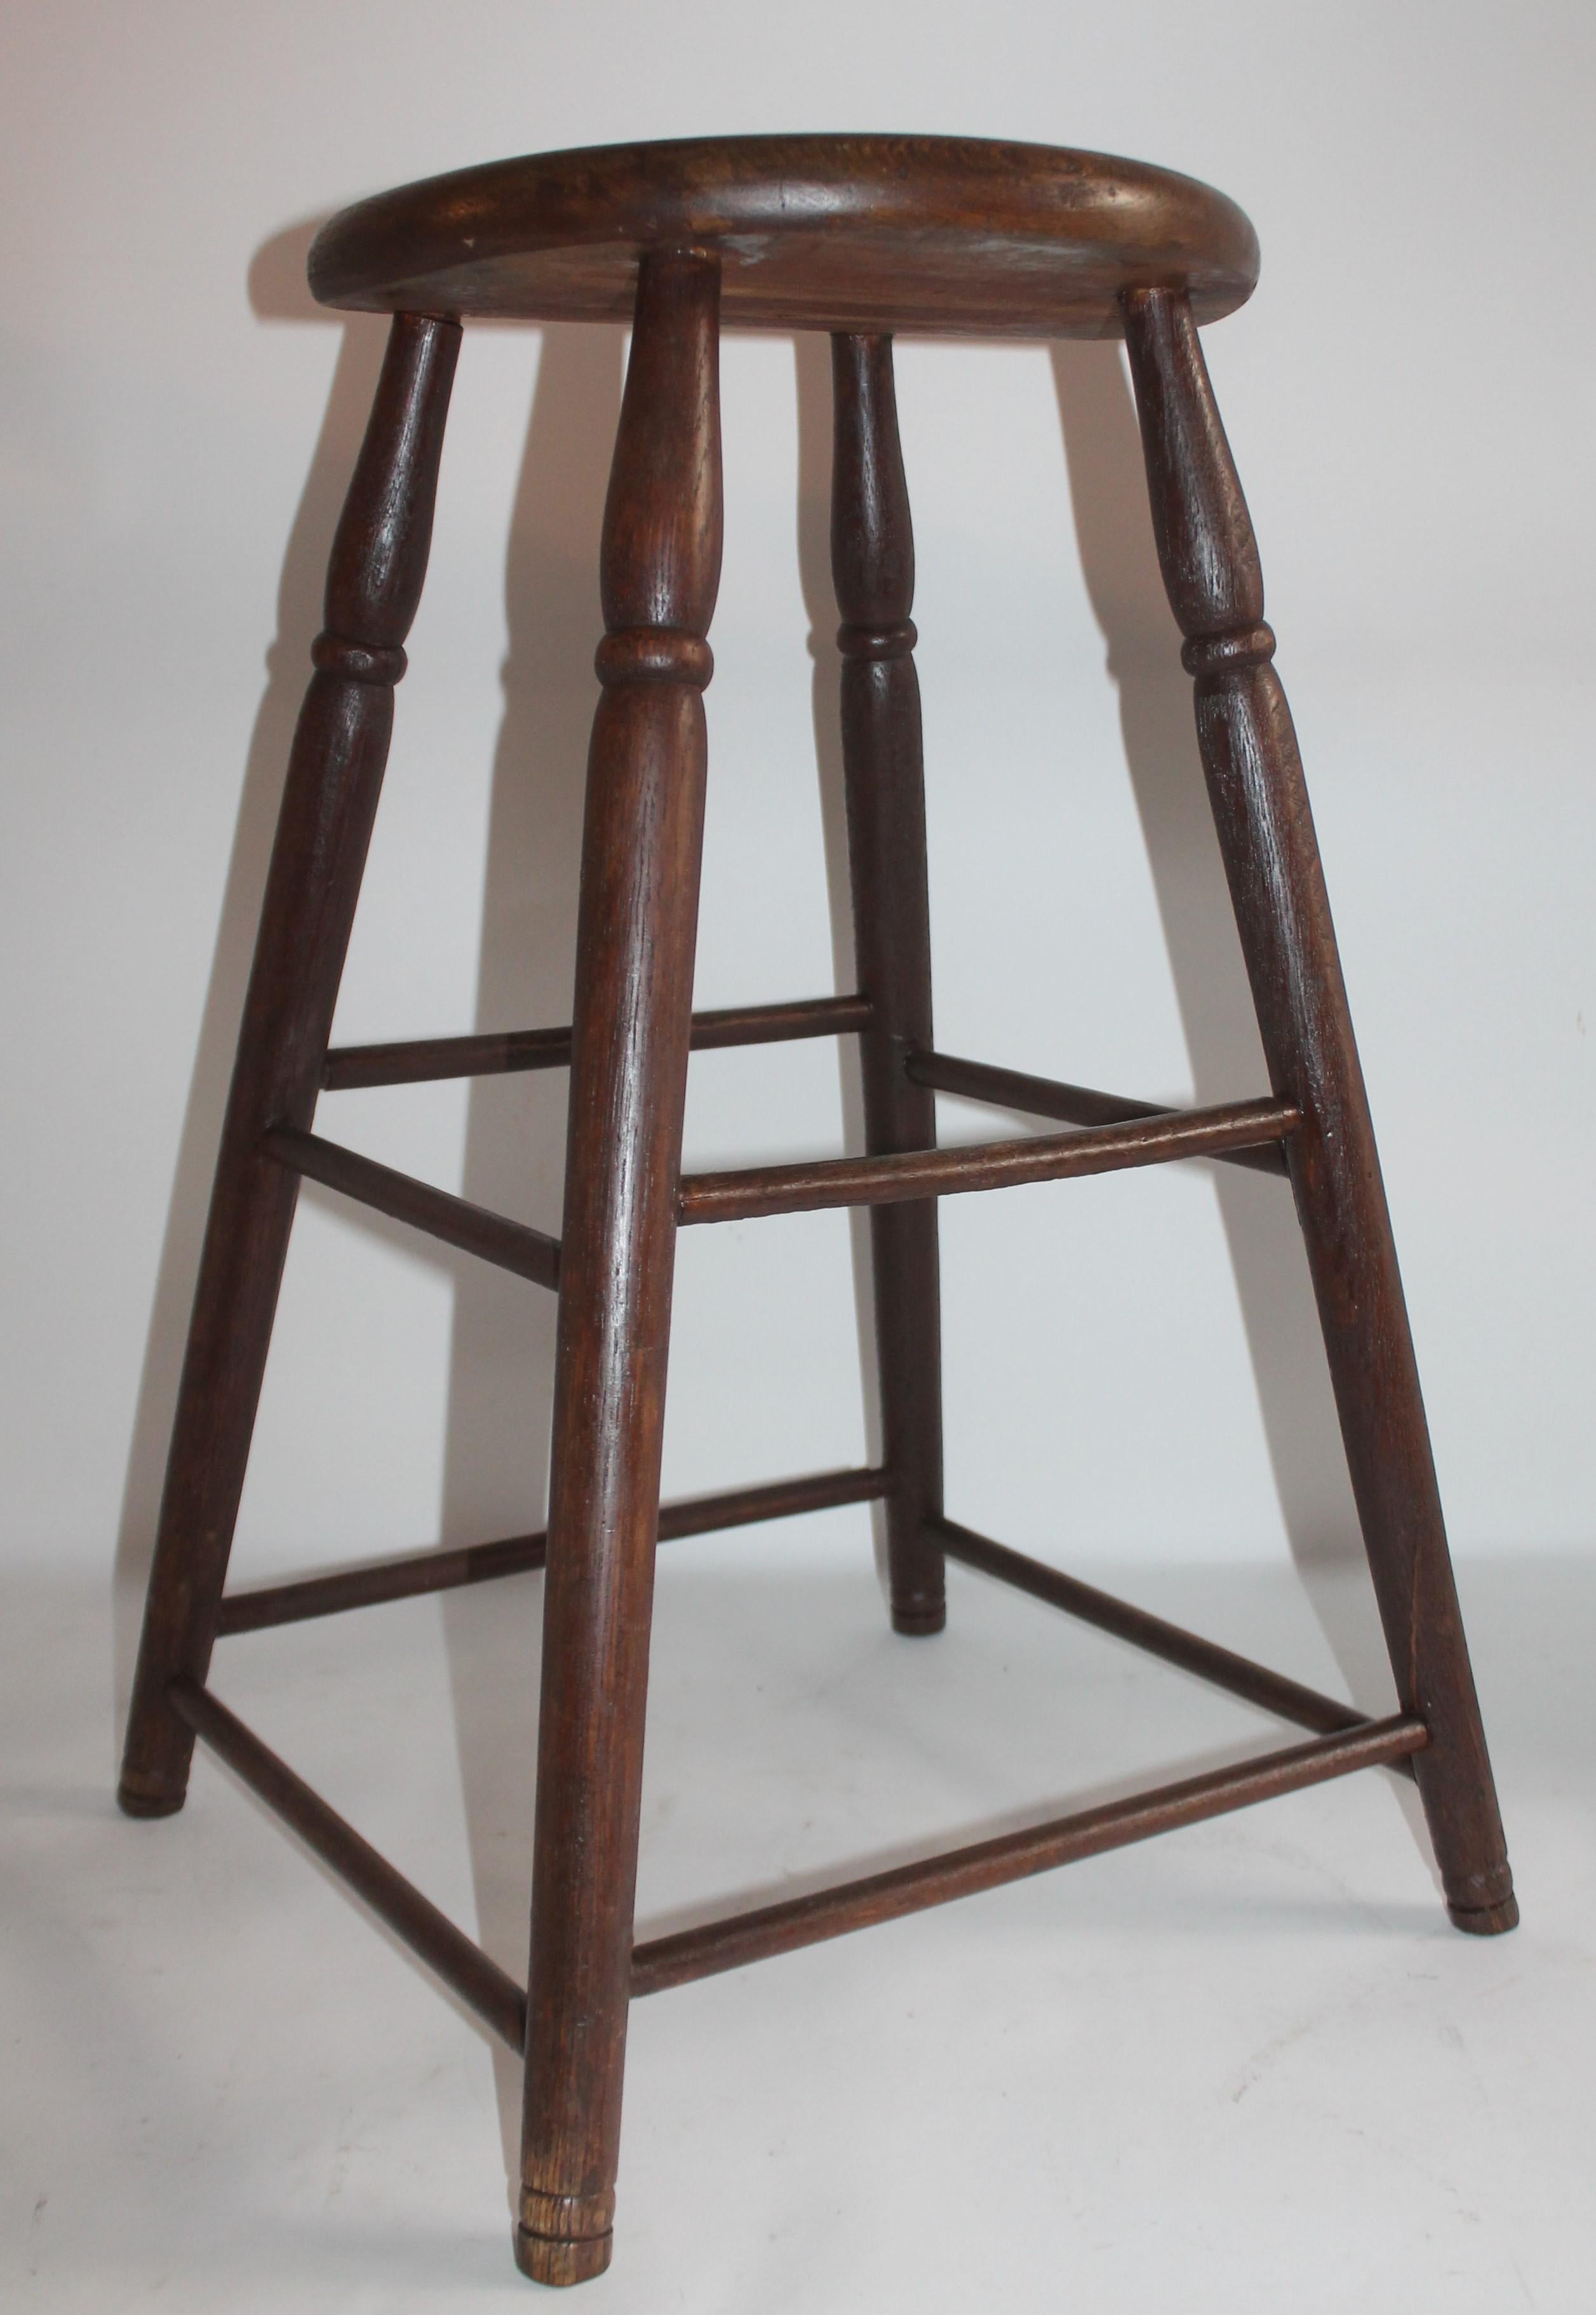 This fine antique weavers stool is in fine sturdy condition. It was found in New England.